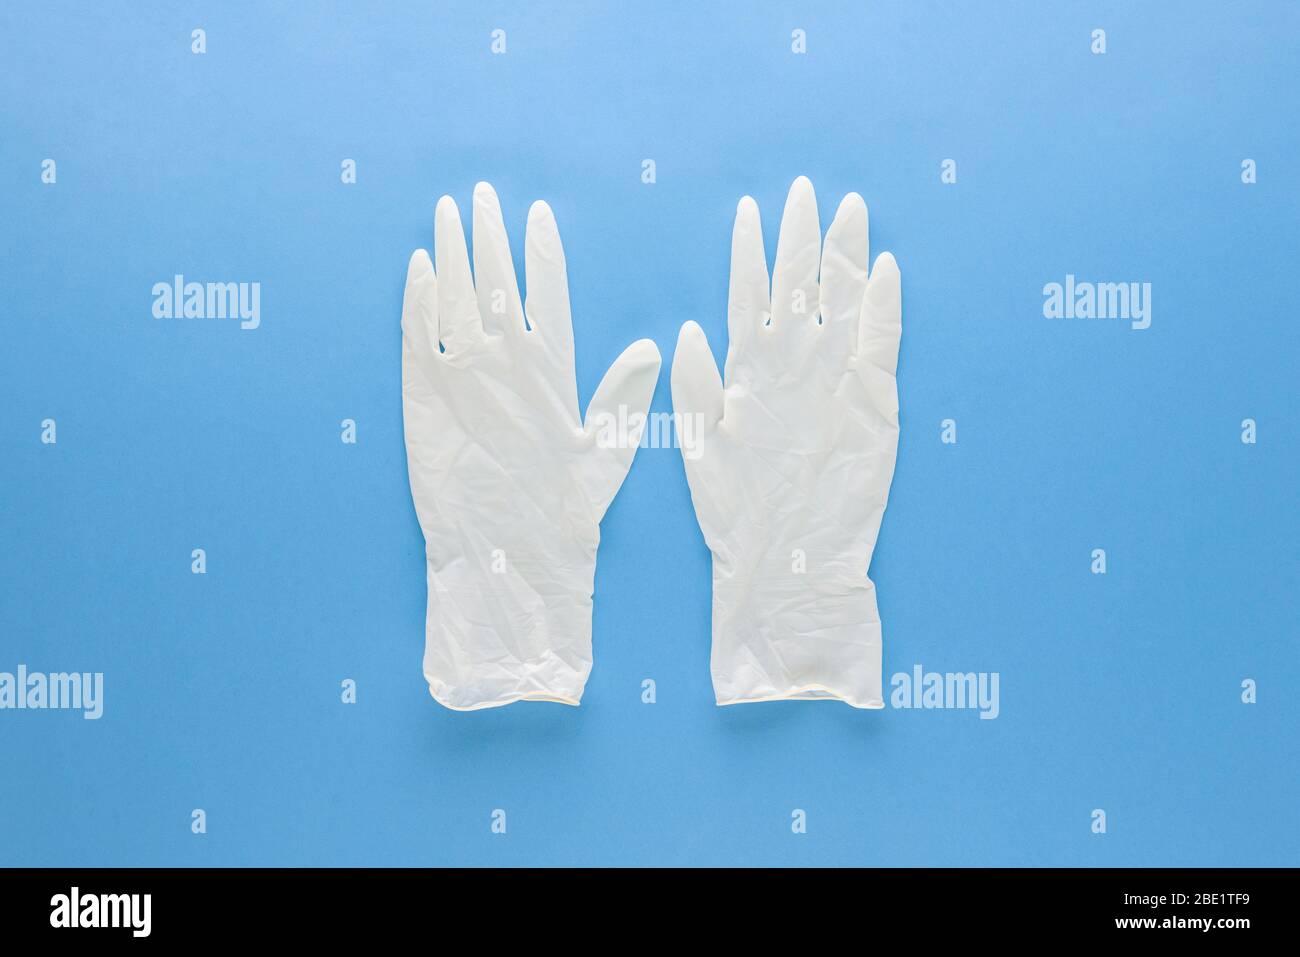 New clean medical rubber gloves for protecting hands from germs isolated on light blue background Stock Photo